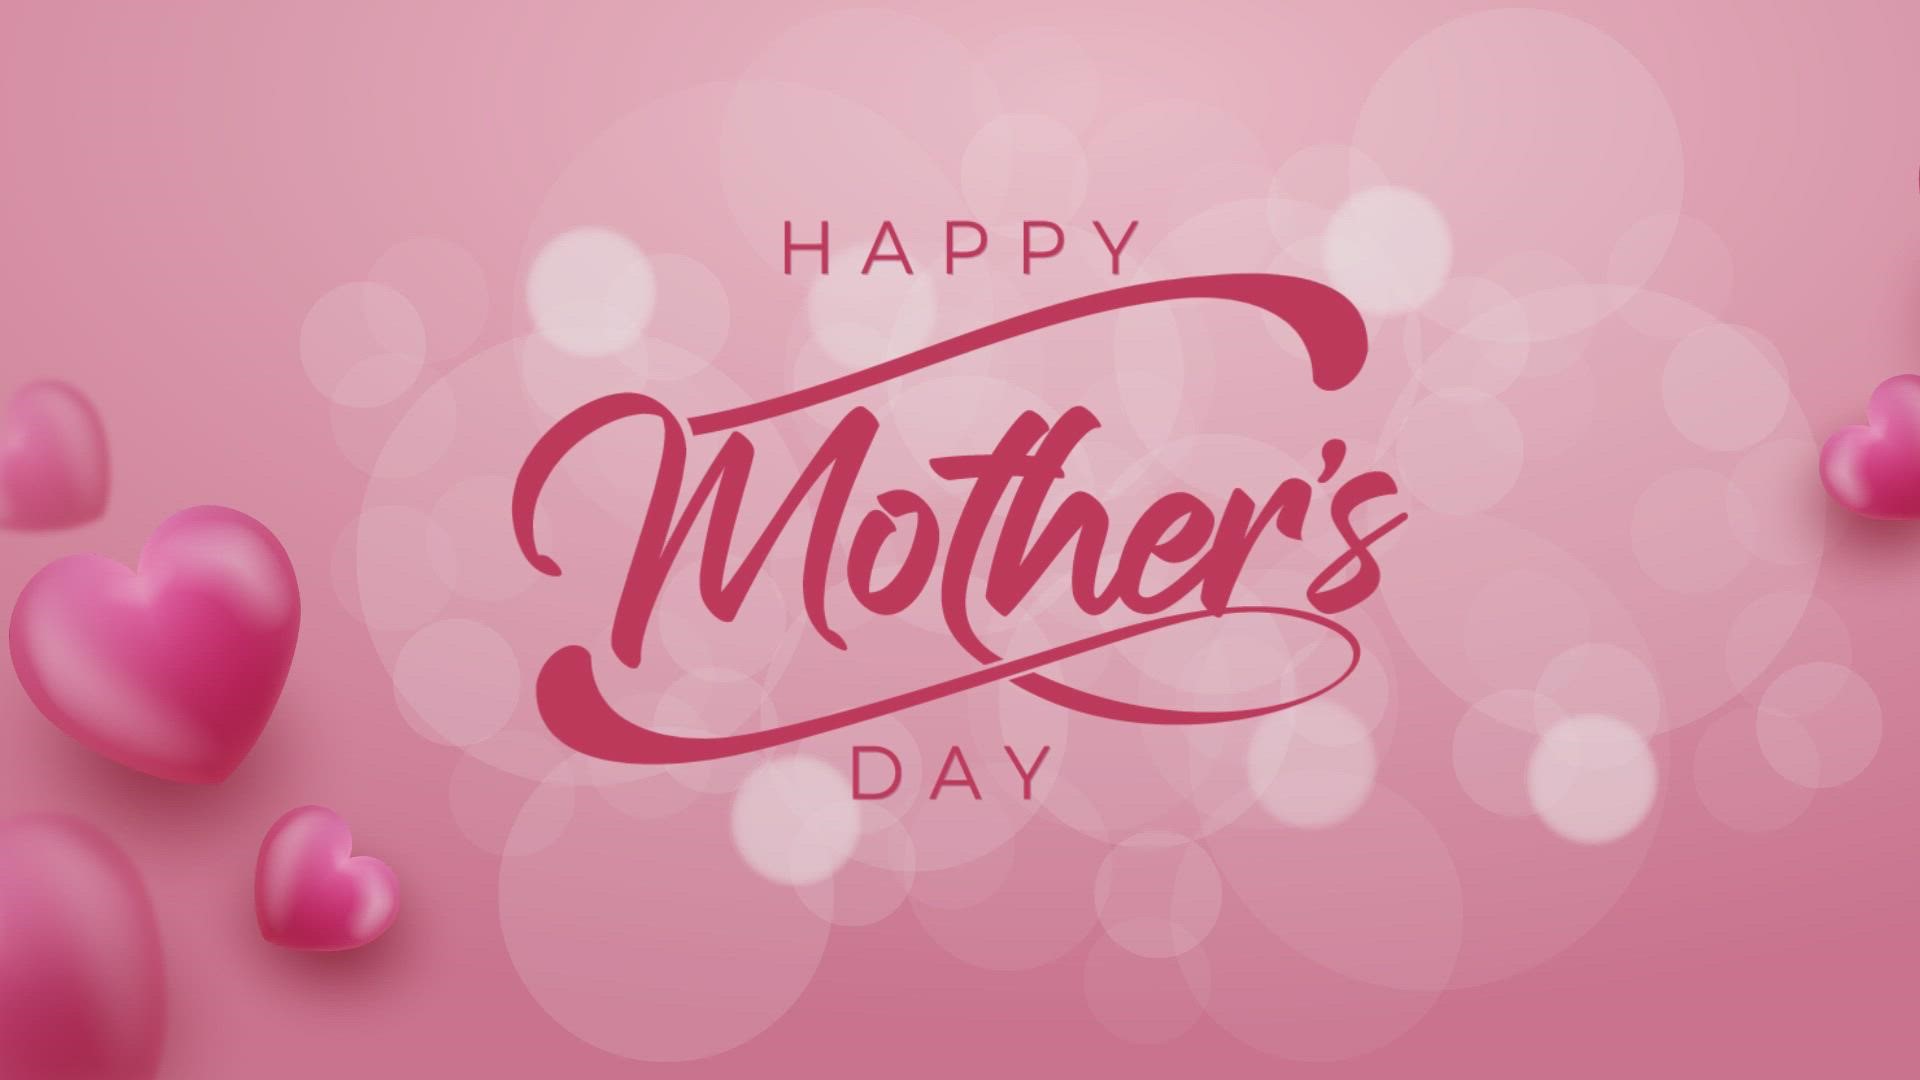 Mother’s Day is the second-largest spending holiday in the U.S. behind Christmas.